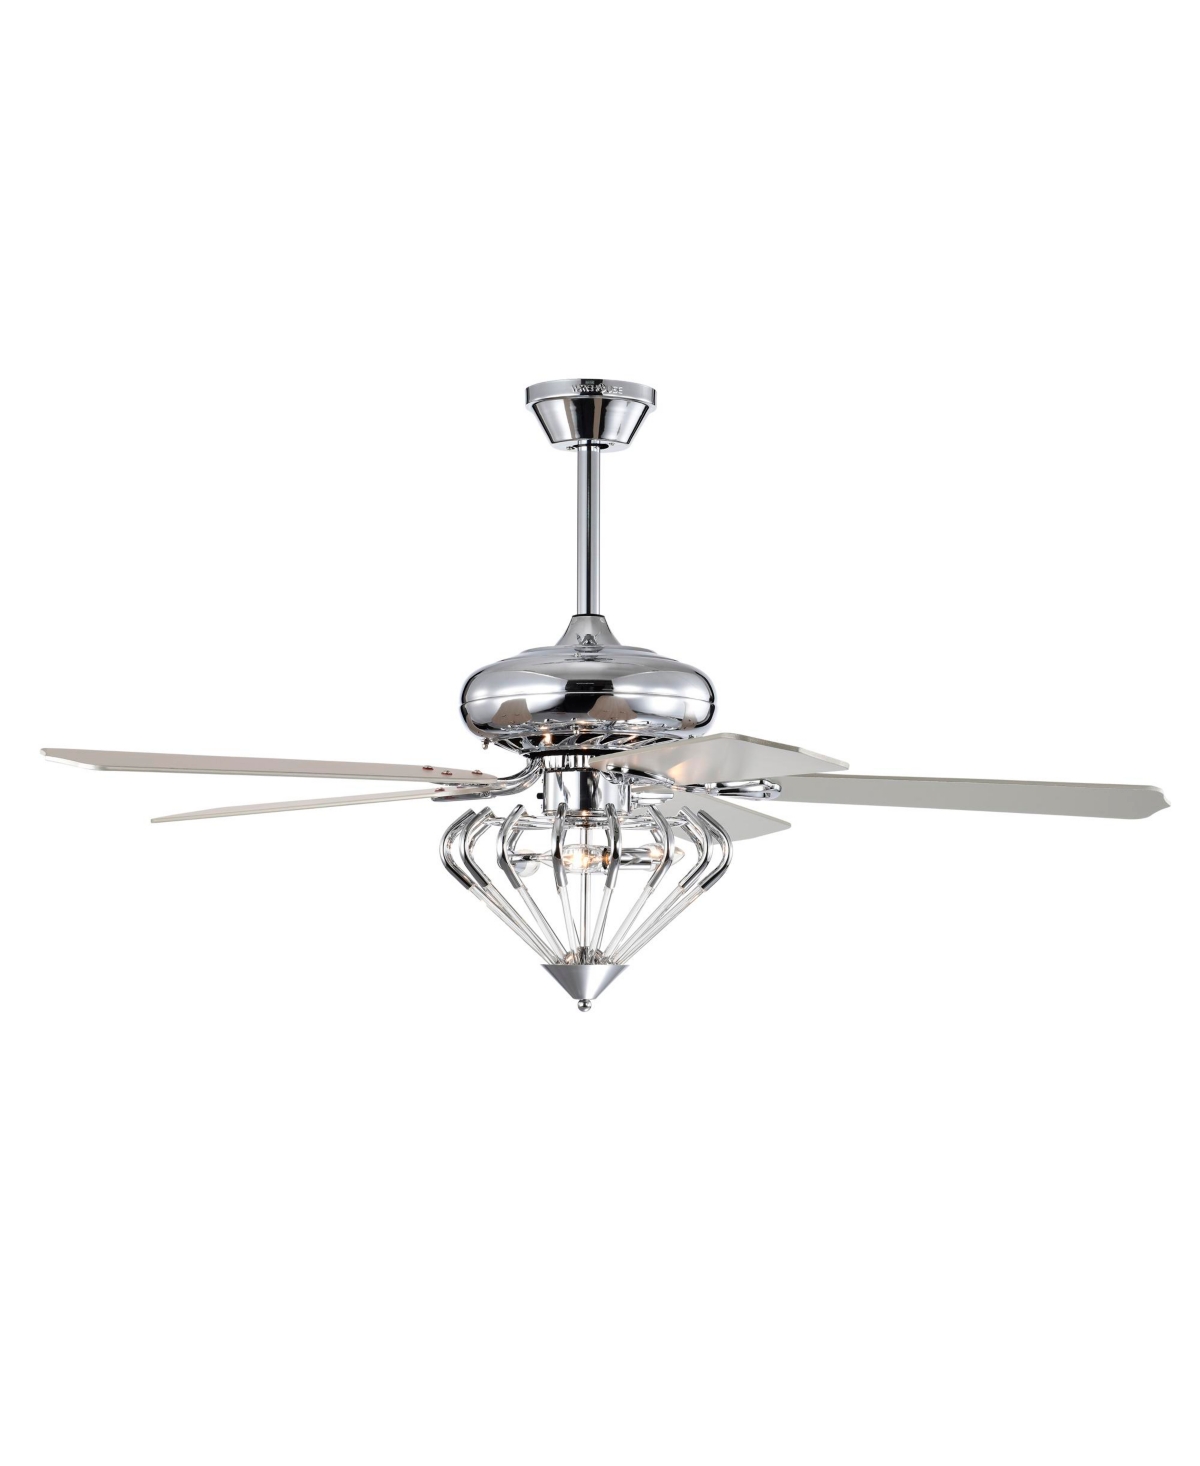 Home Accessories Alesya 52" 3-light Indoor Ceiling Fan With Light Kit And Remote In Chrome